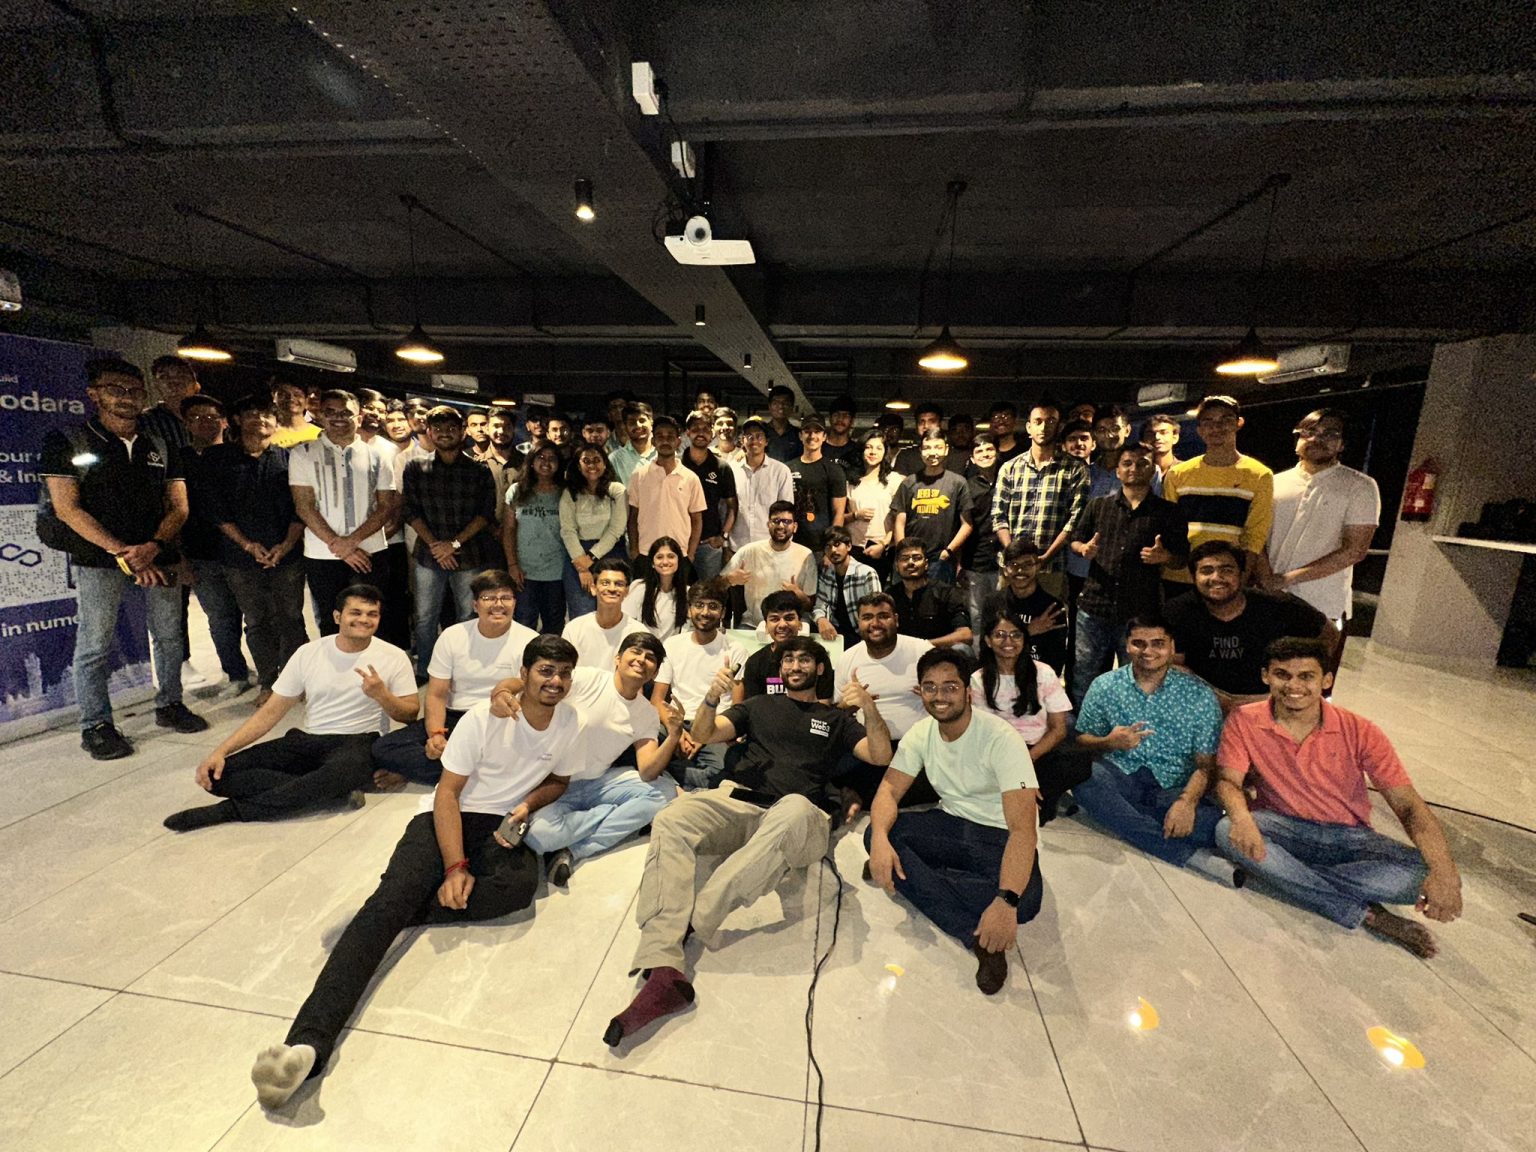 Image of attendees at the Scalybee Digital and Polygon Guild Vadodara event, standing together in one frame. The group includes developers, entrepreneurs, and enthusiasts who gathered to learn about Web3 and decentralized technologies.